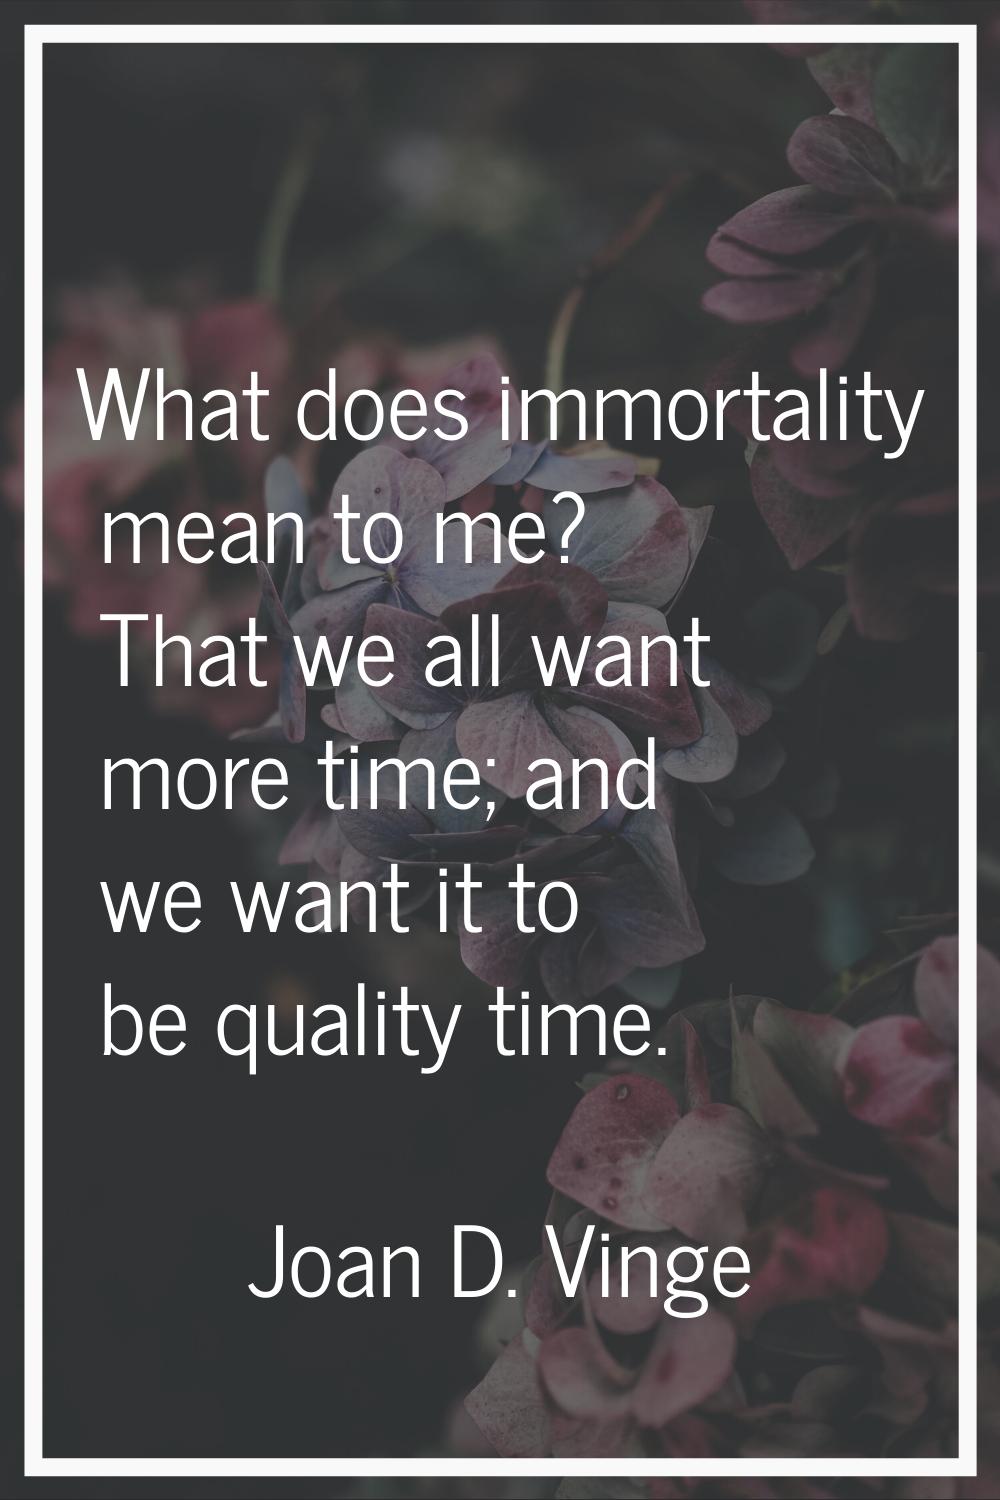 What does immortality mean to me? That we all want more time; and we want it to be quality time.